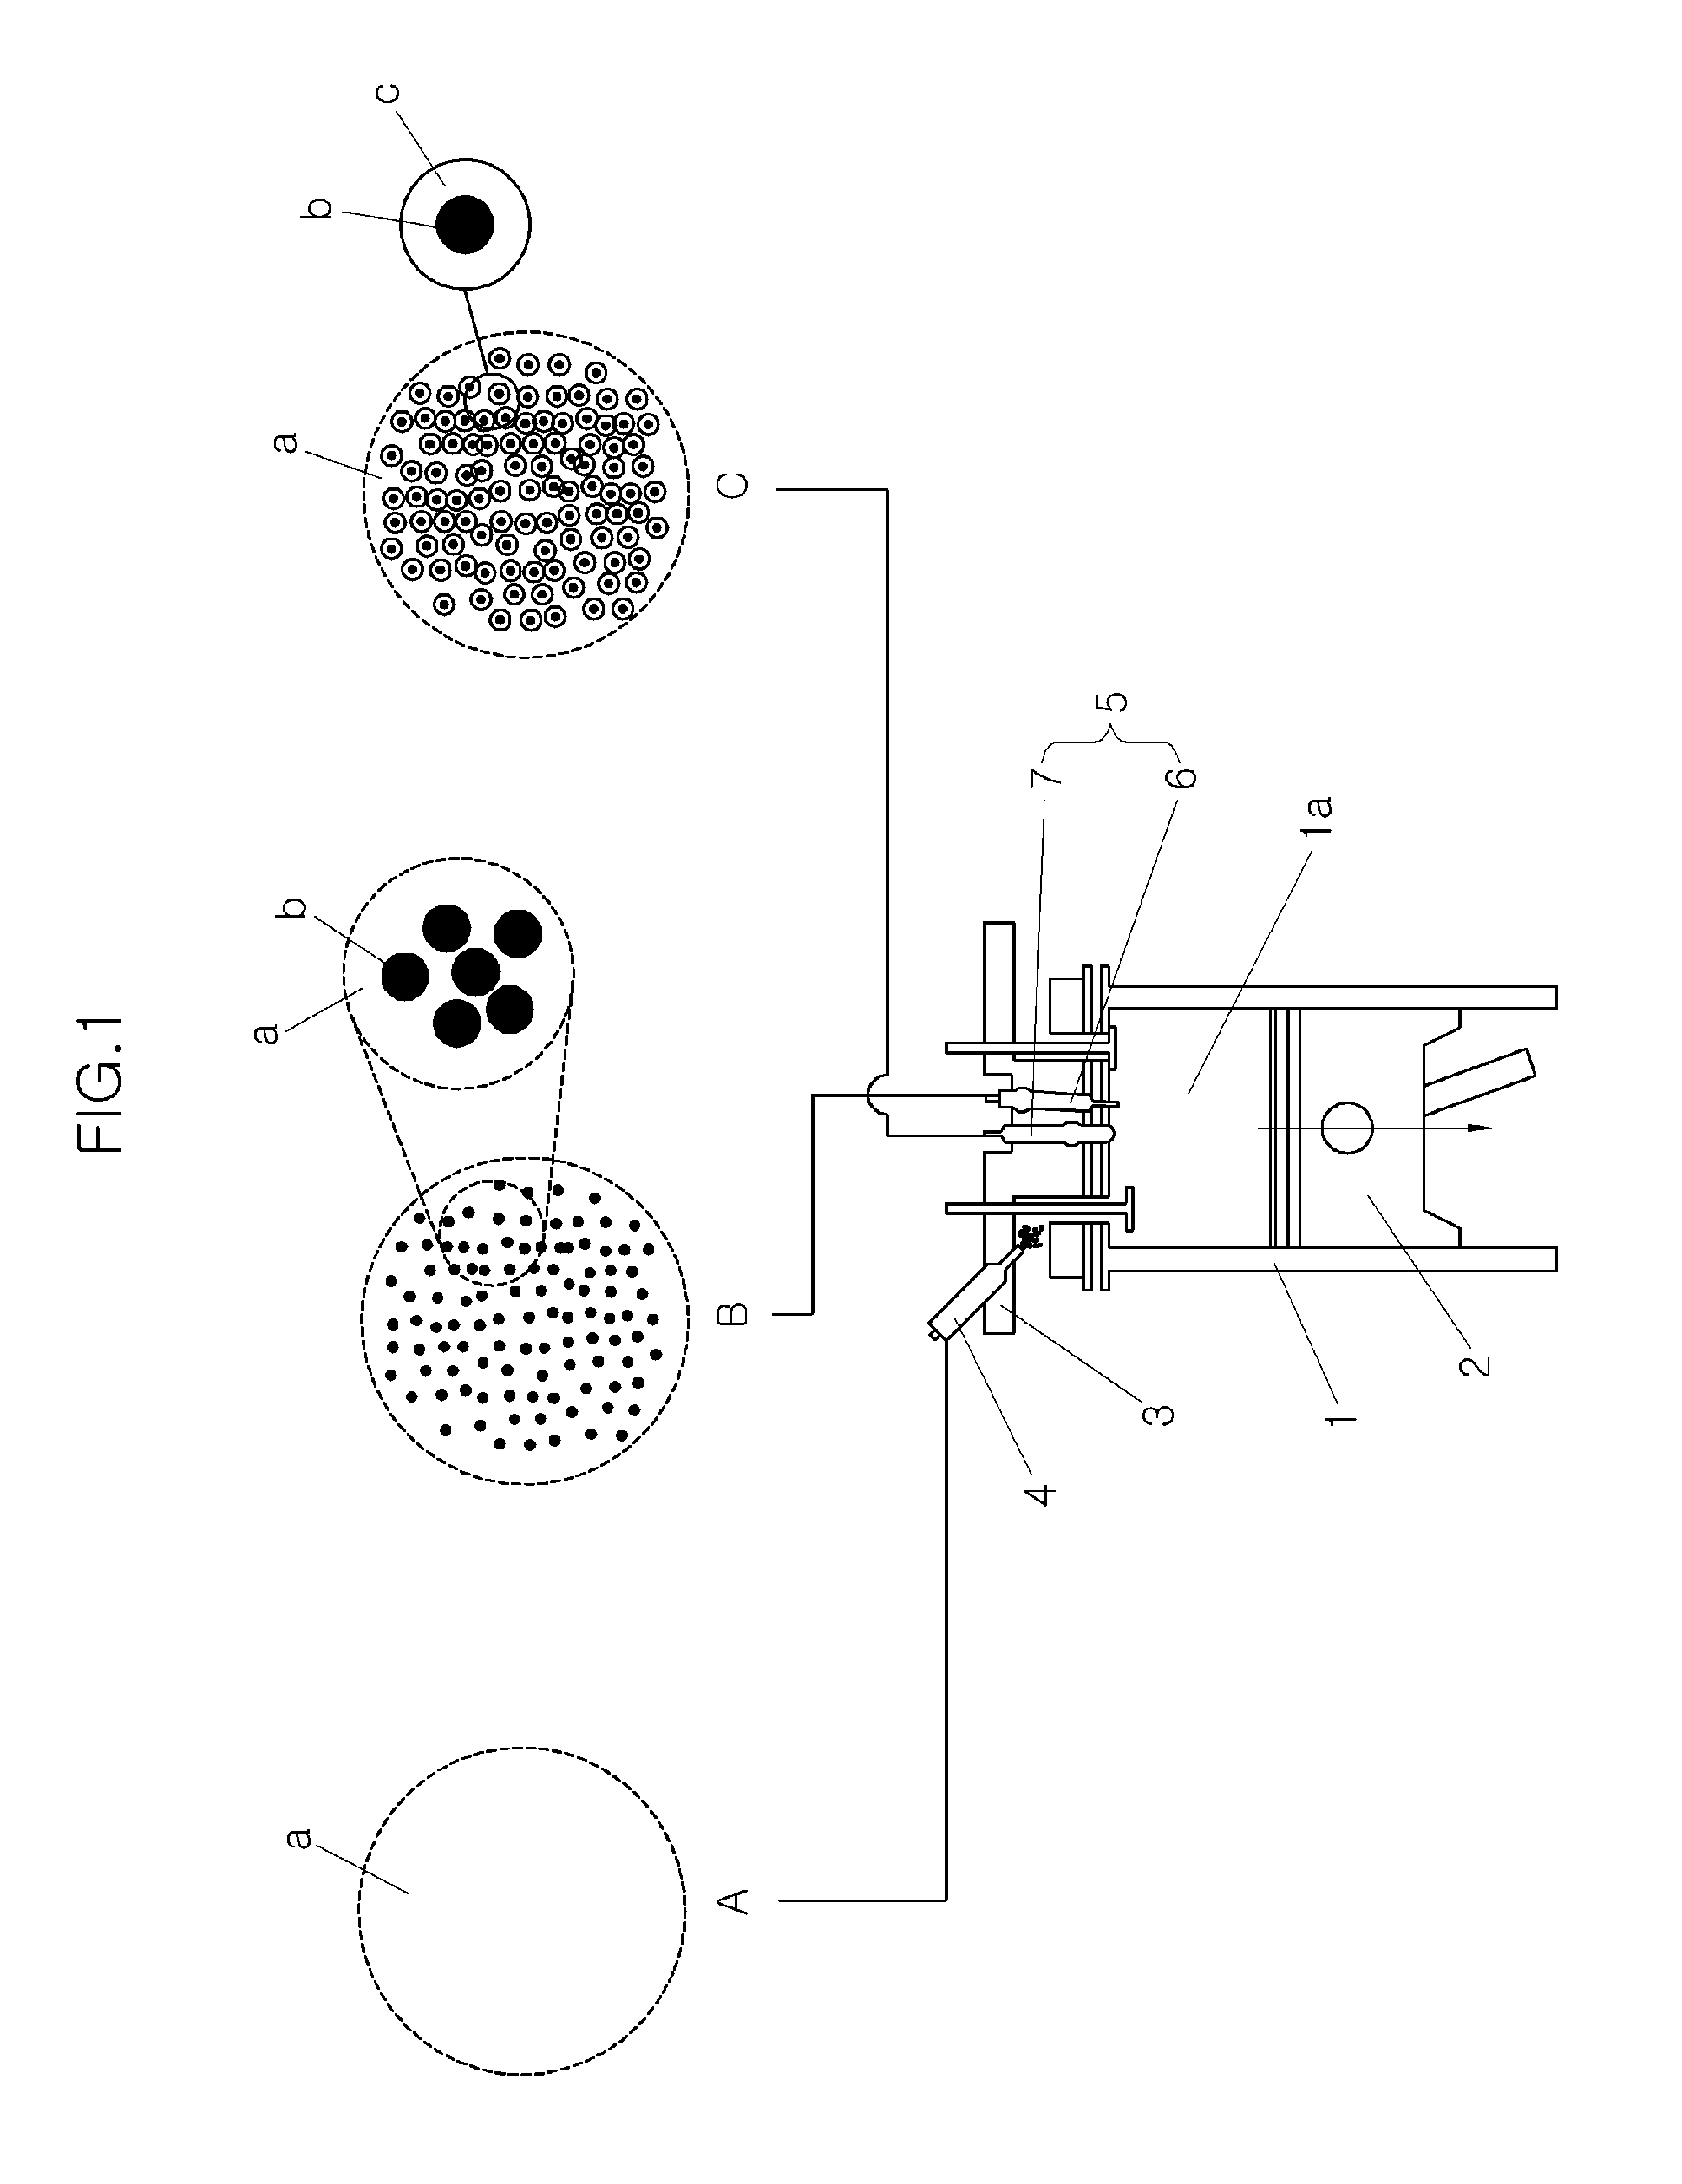 Dual fuel combustion system based on diesel compression ignition triggered ignition control